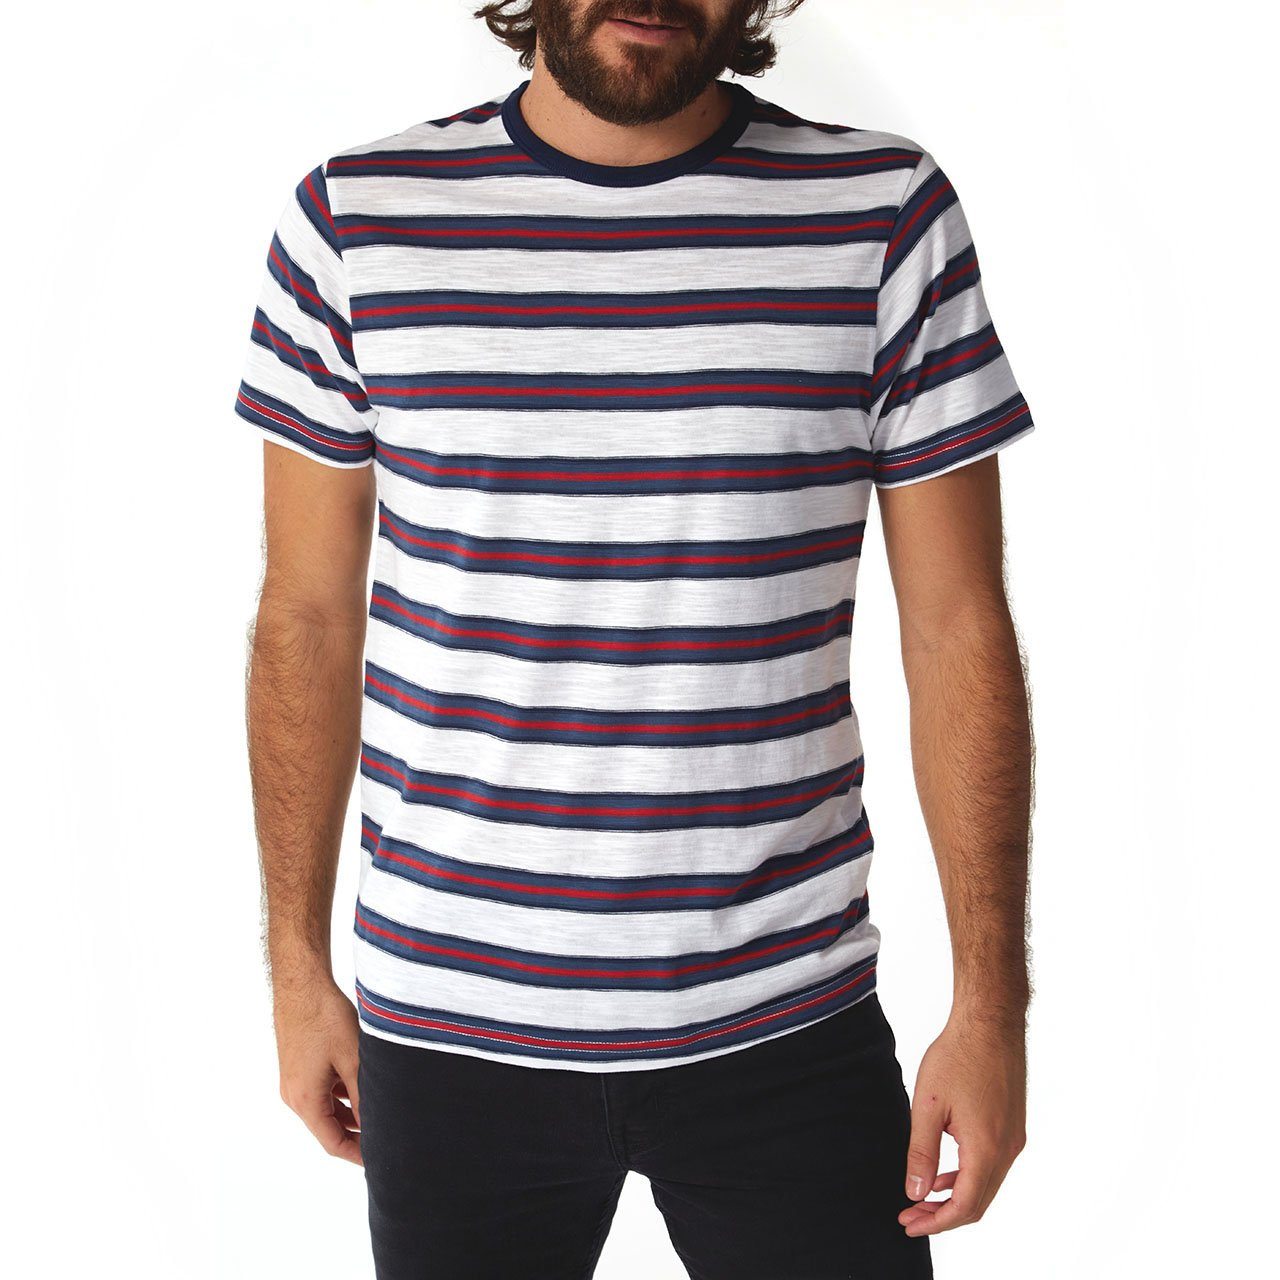 Mateo Striped Tee - PX Clothing